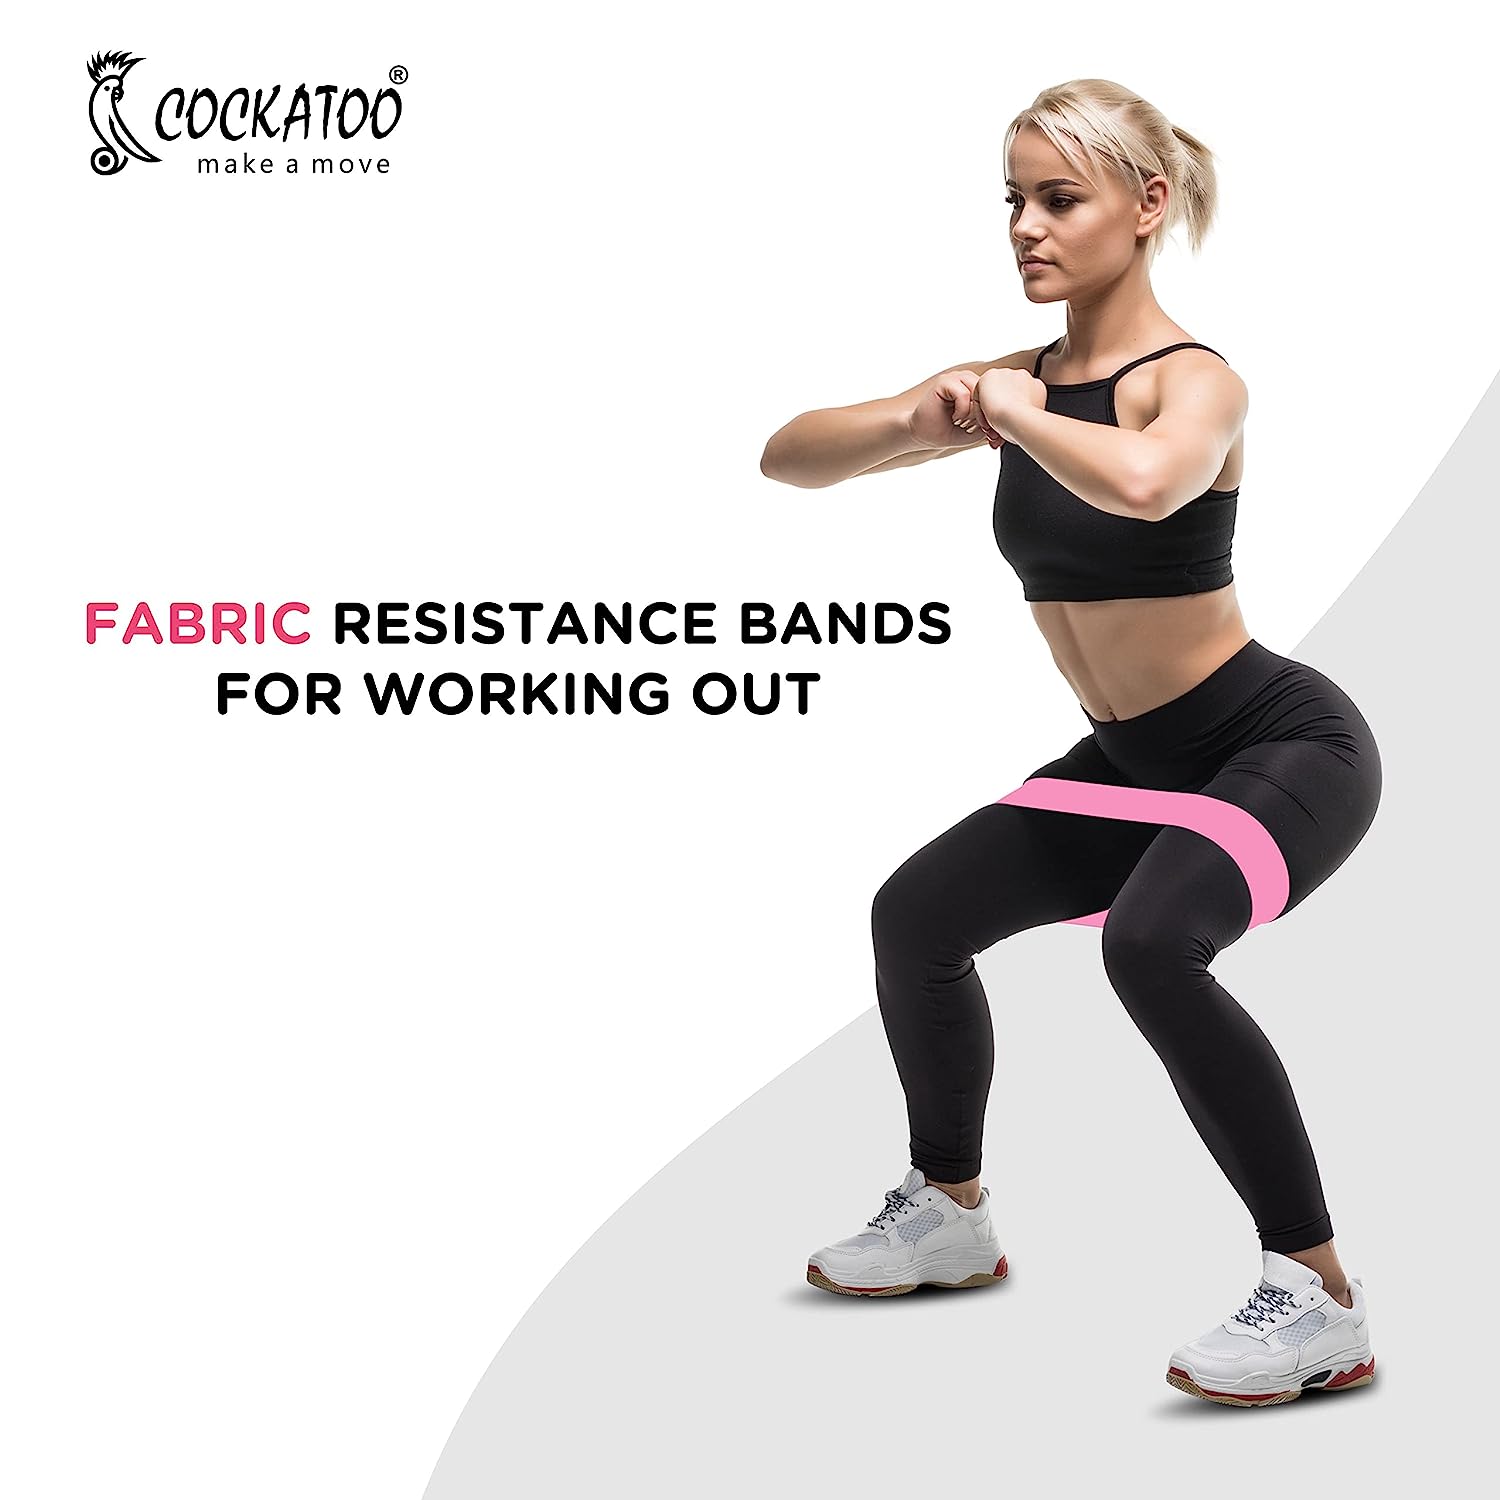 Cockatoo Fabric Resistance Bands for Working Out, Exercise Bands Worko